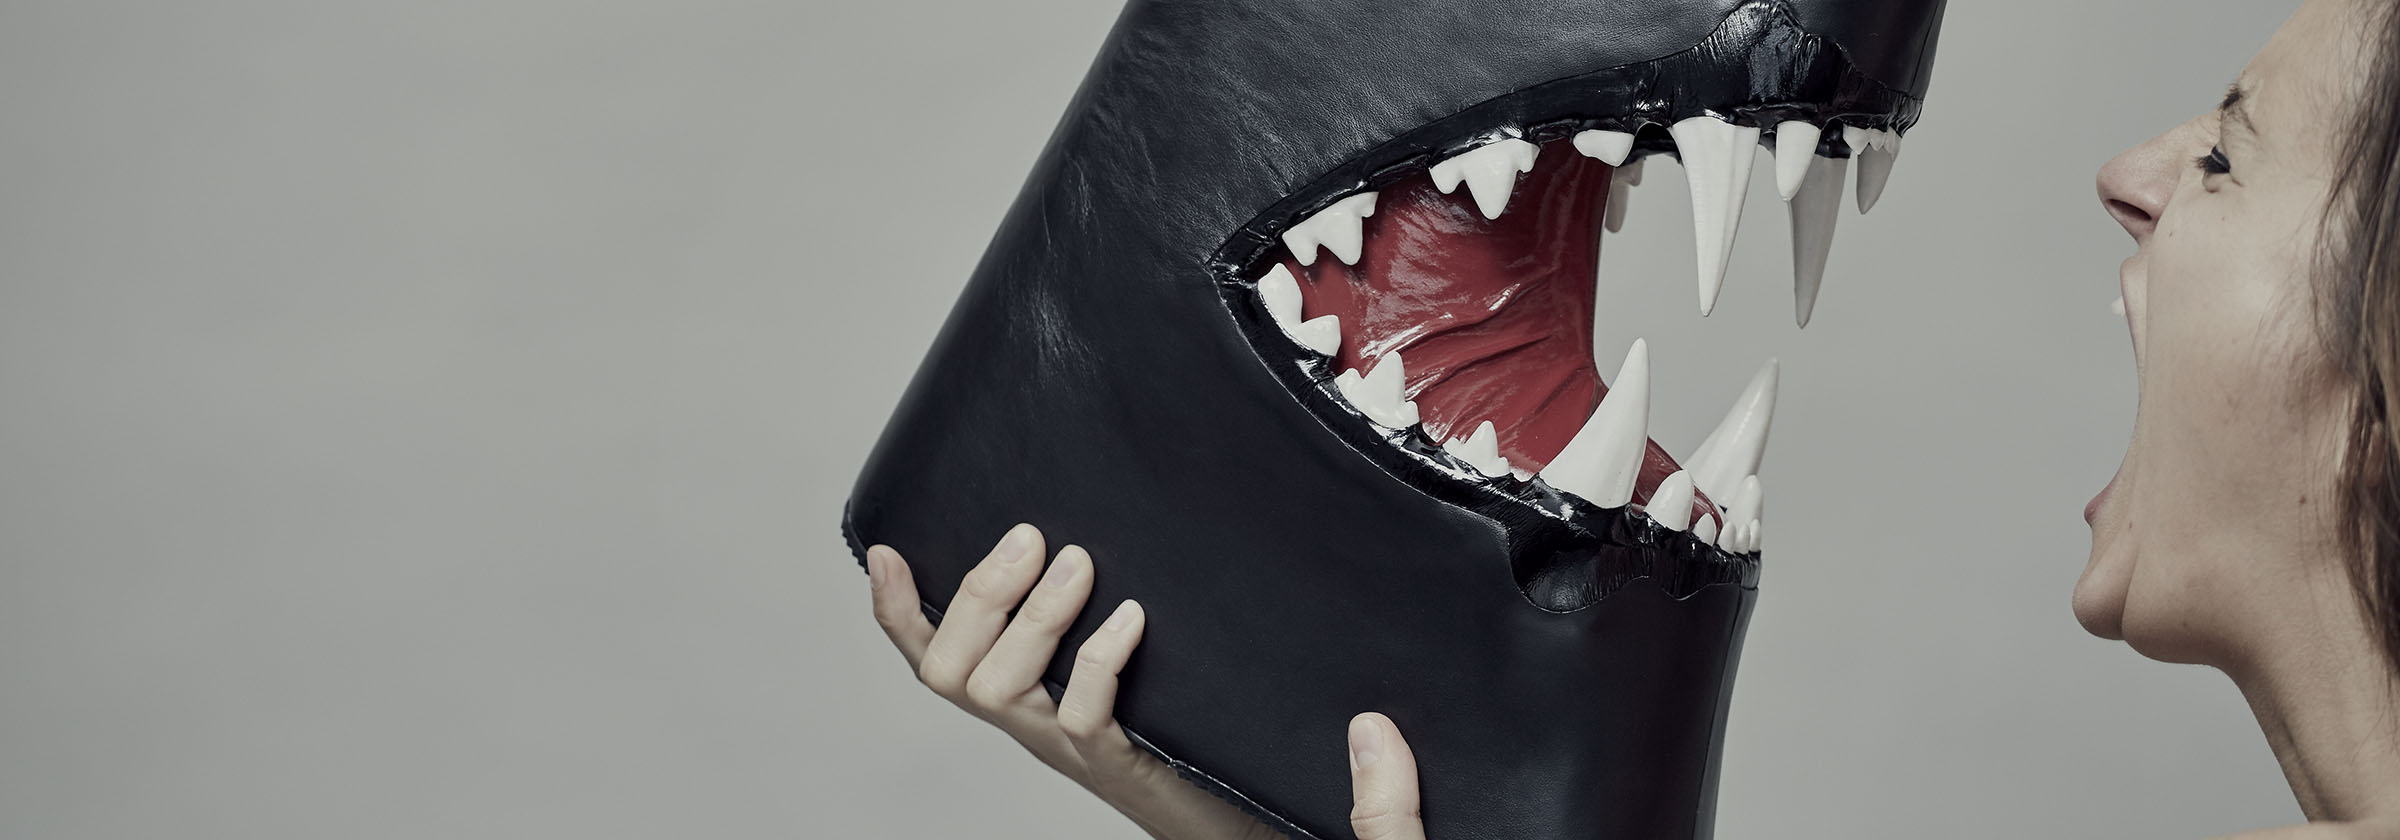 Black boot with sharp teeth held by female model screaming at it